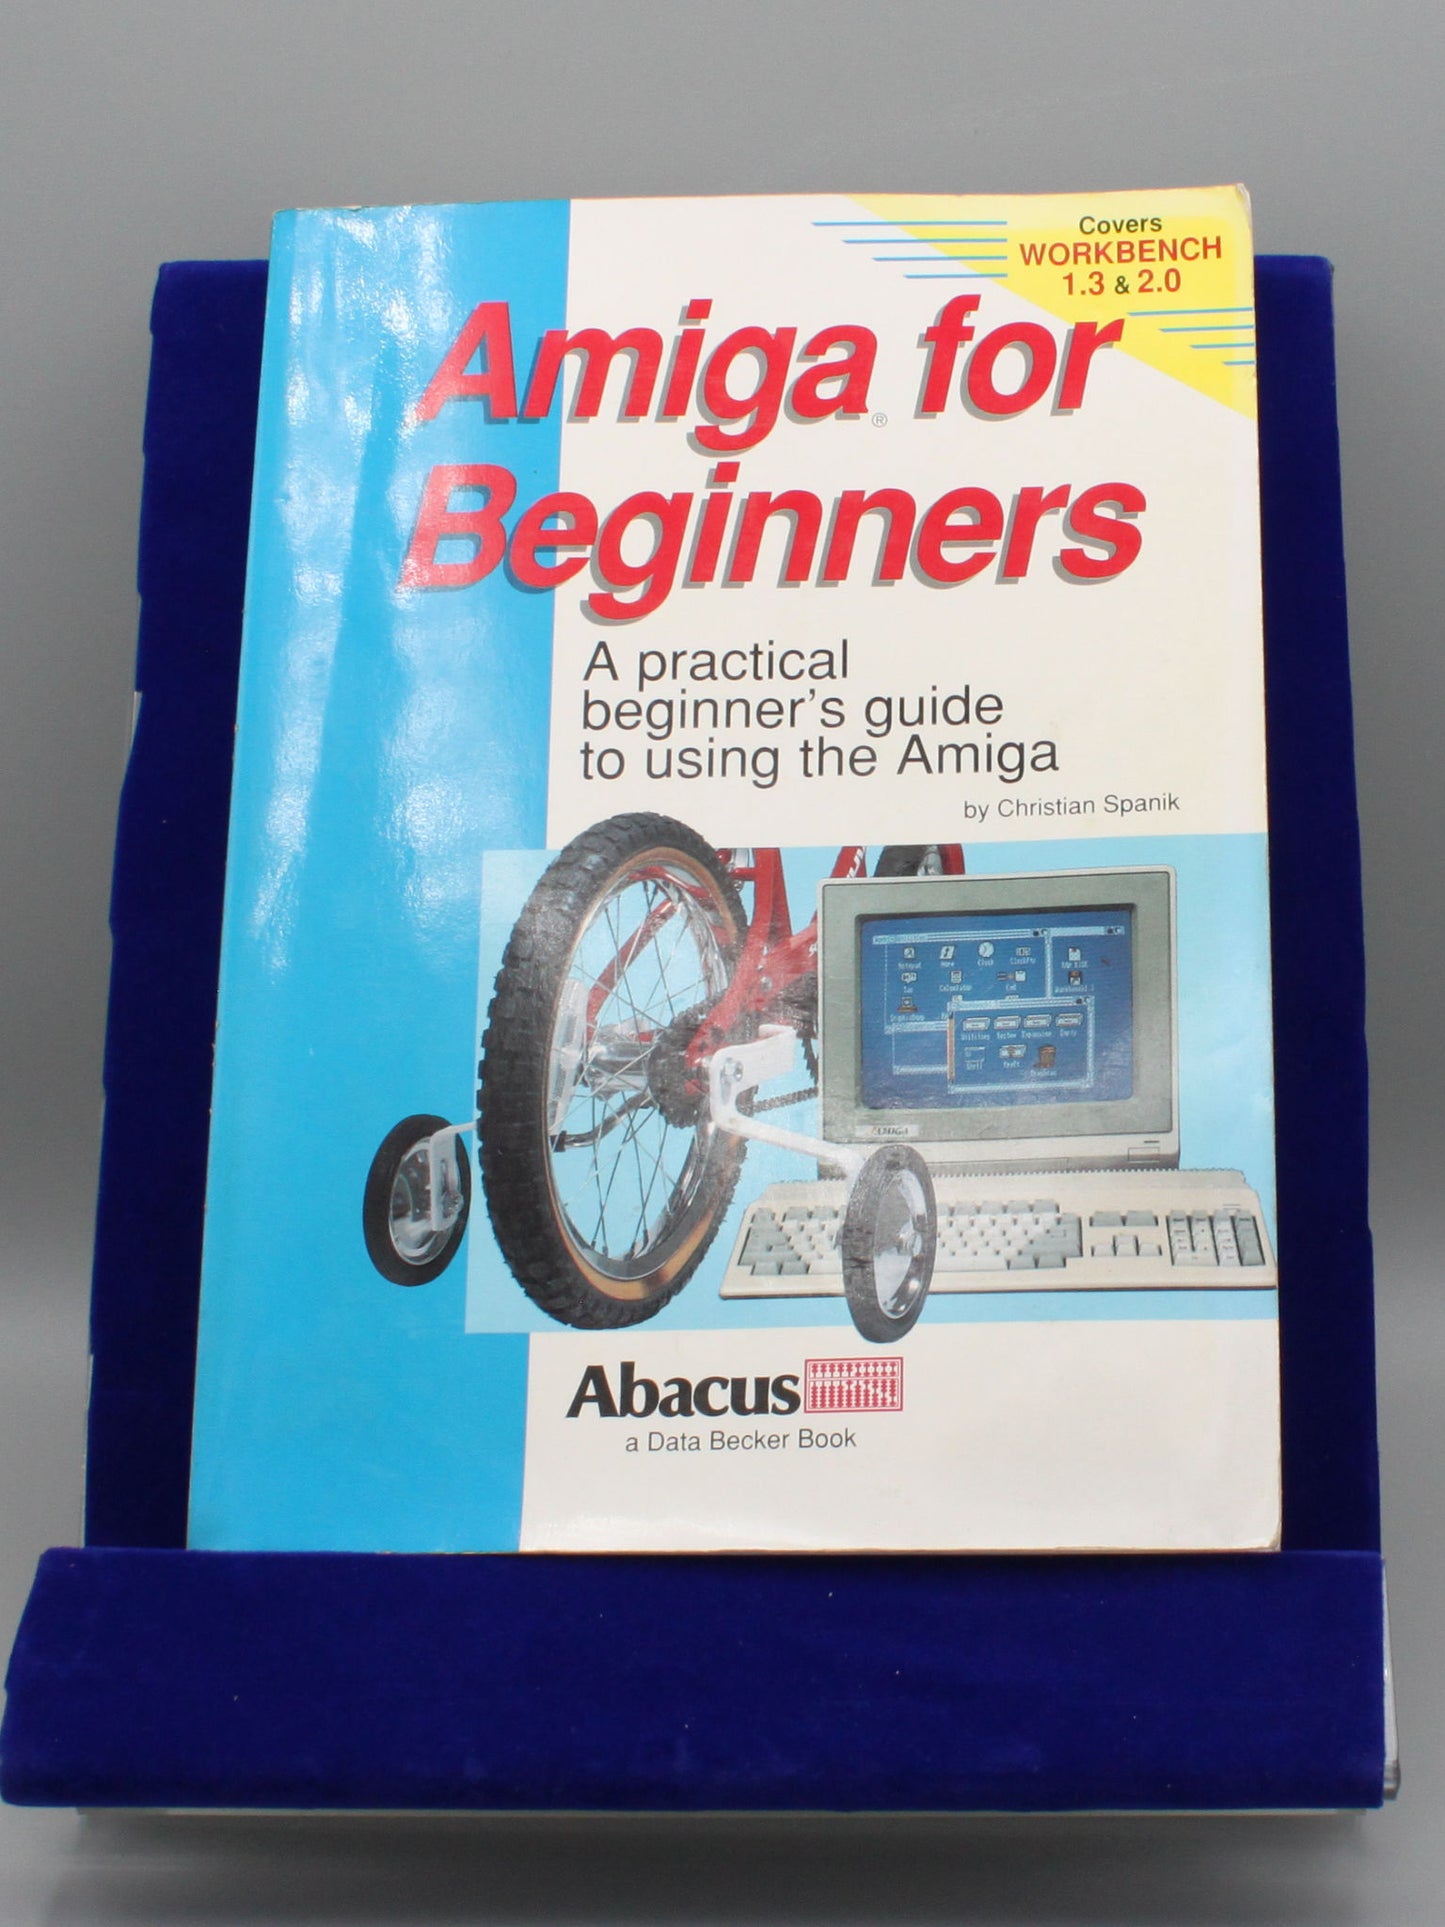 Amiga for Beginners from Abacus